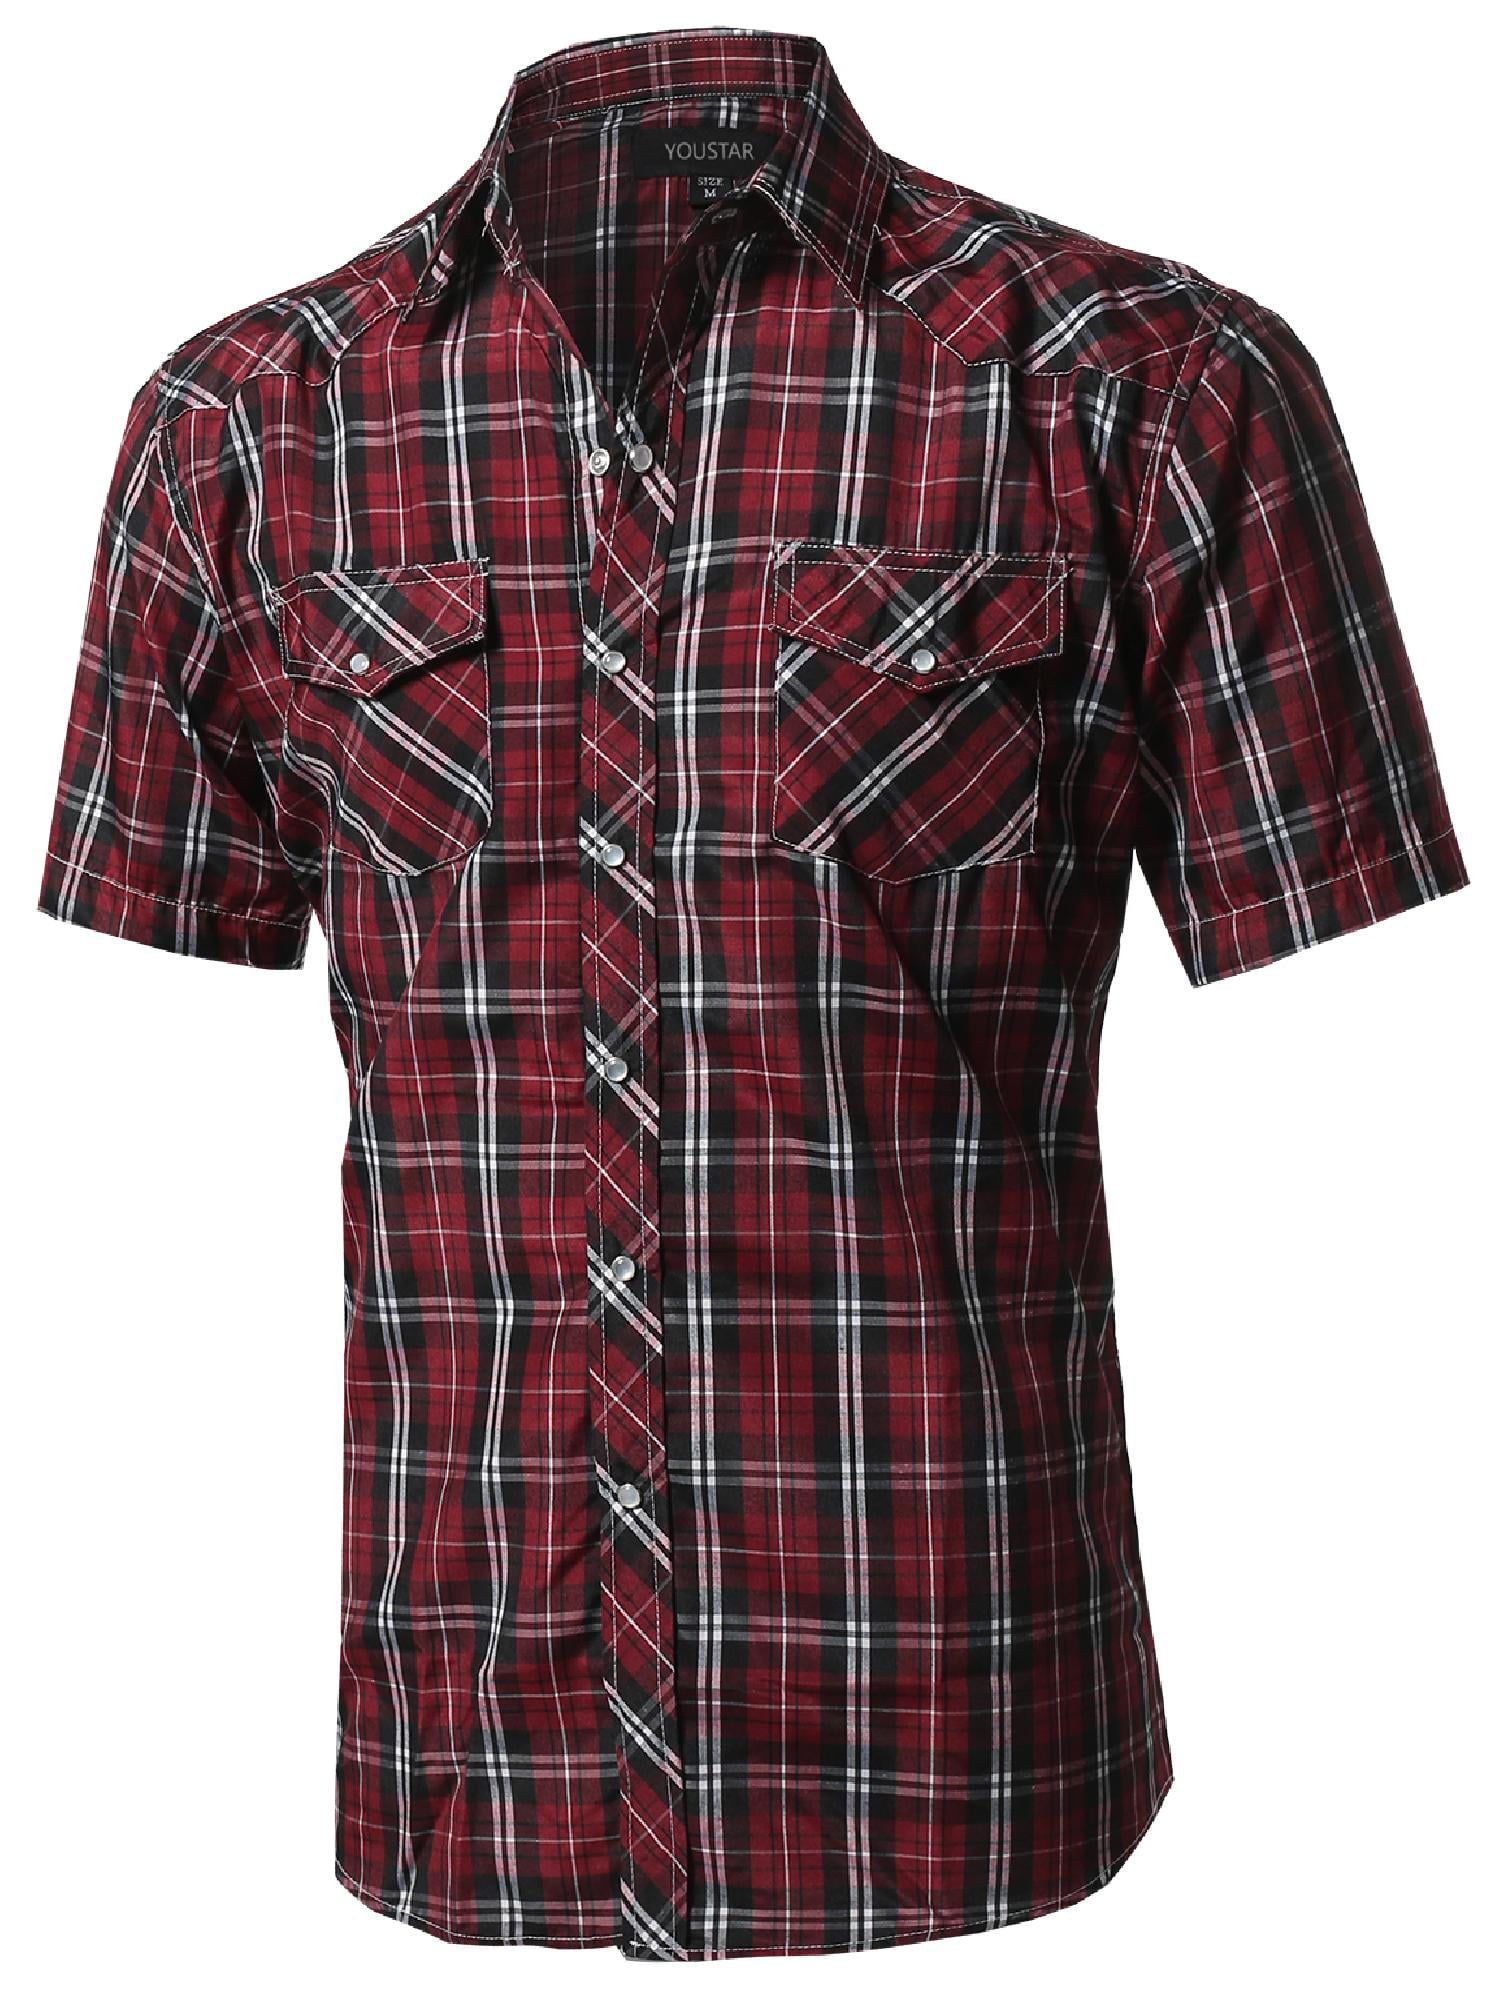 Youstar Mens Solid Plaid Long Sleeves Western Casual Button Down Shirt 